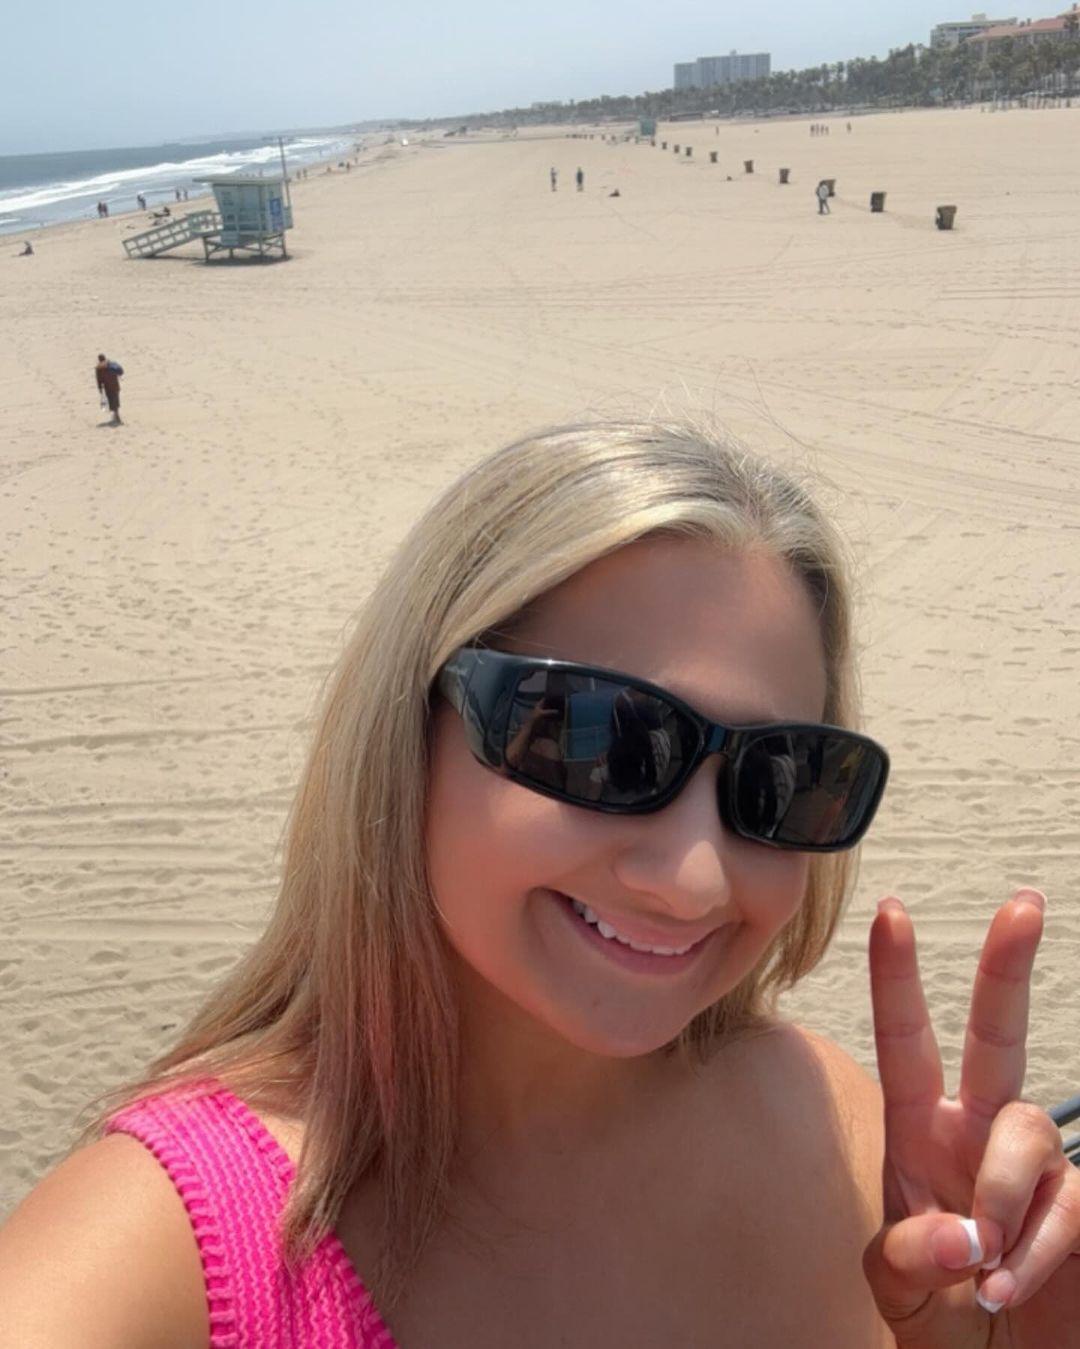 Gypsy Rose Blanchard takes a selfie on the beach